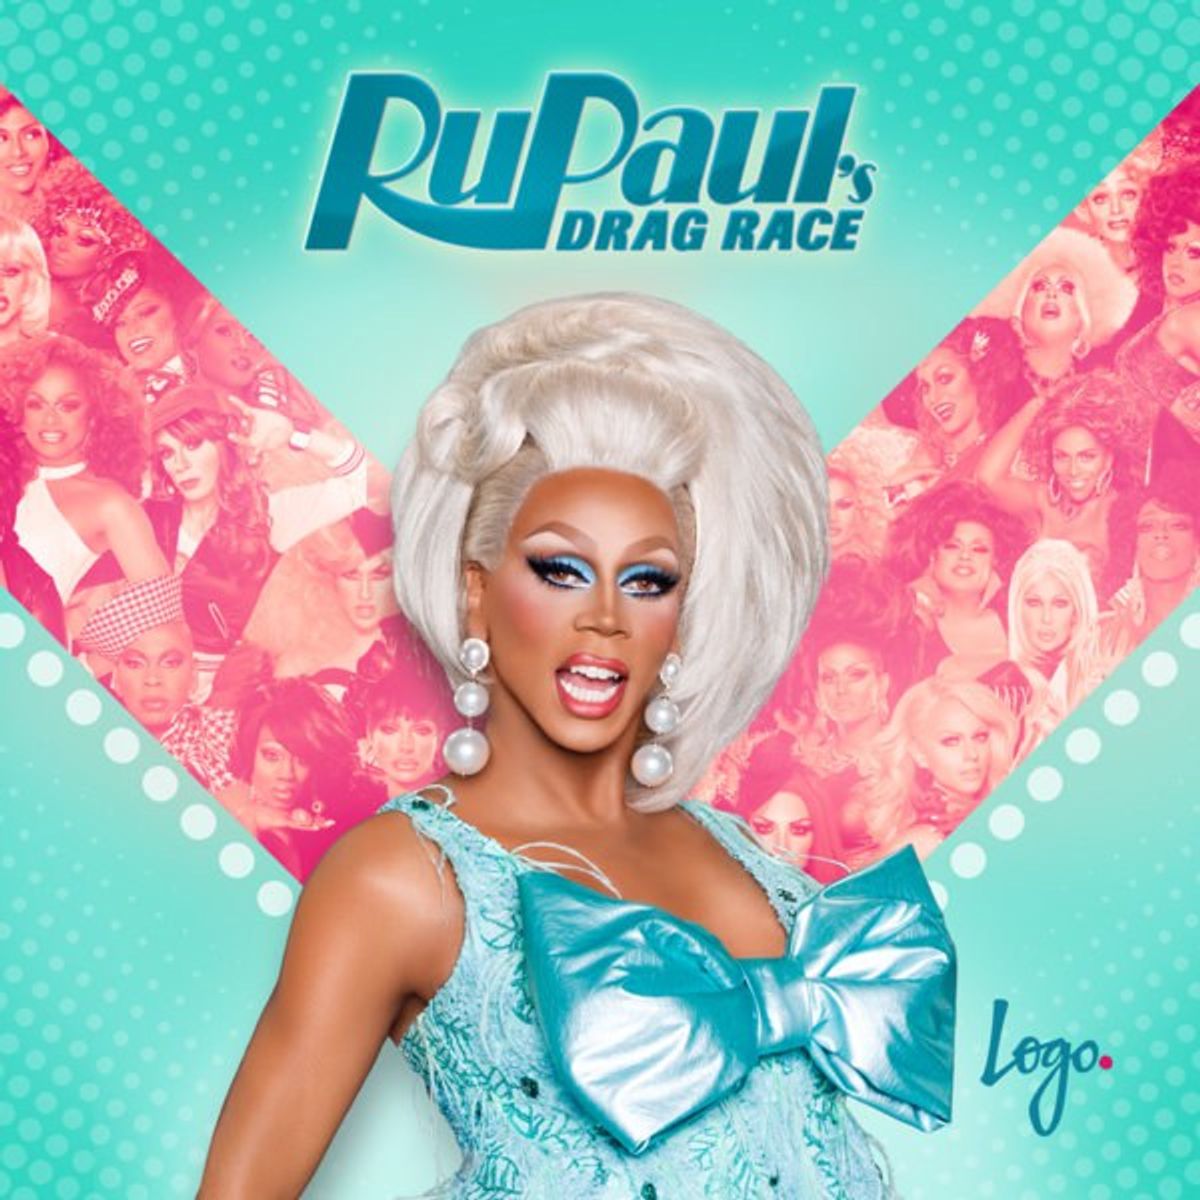 Life Lessons From "RuPaul's Drag Race"